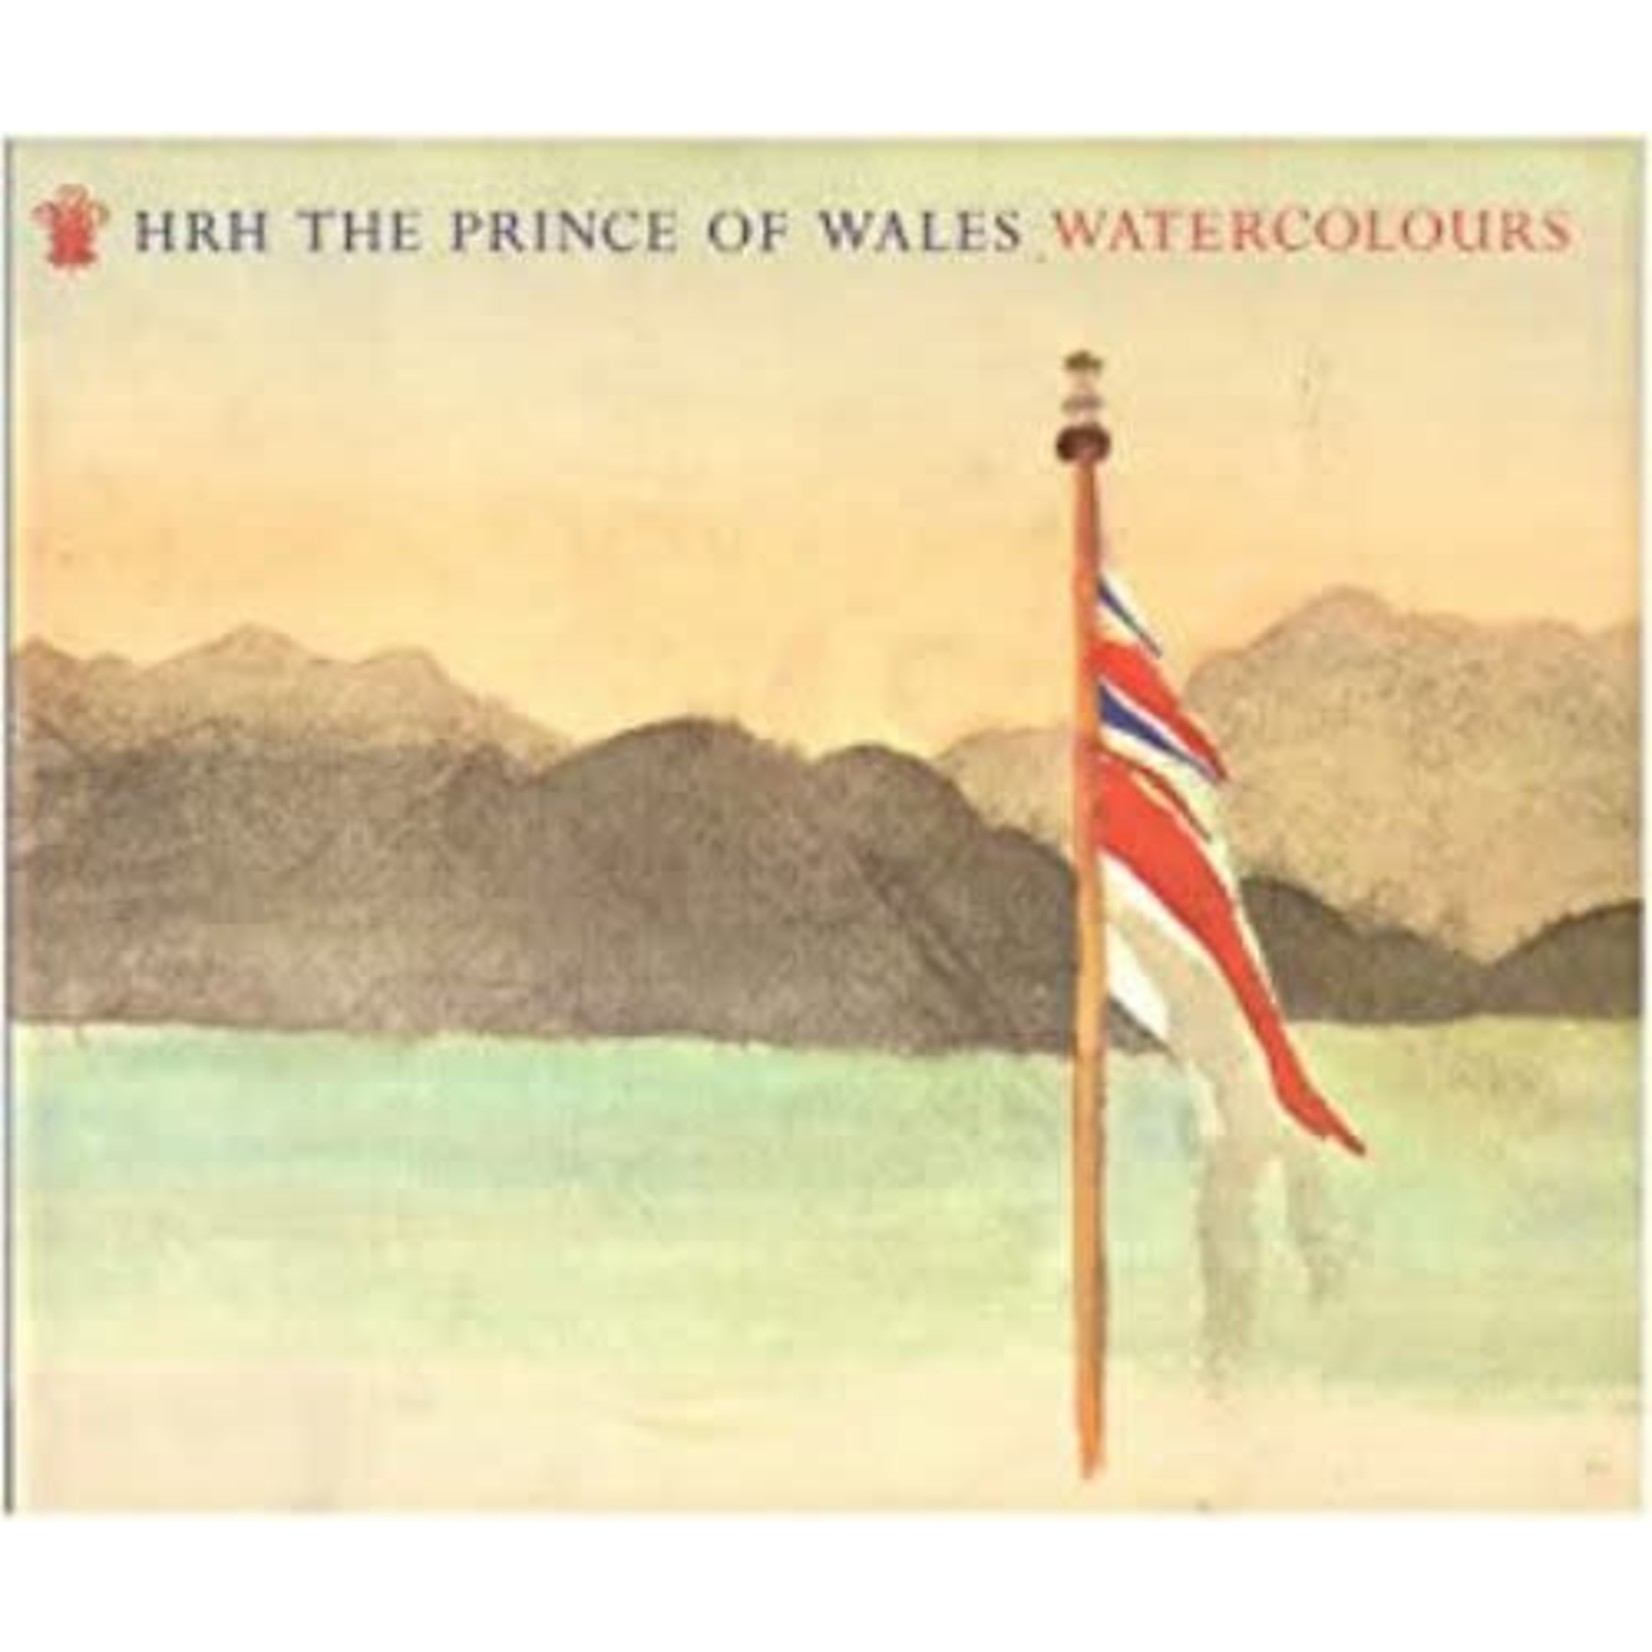 Charles, Prince of Wales Charles, Prince of Wales (Art) - HRH the Prince of Wales Watercolours